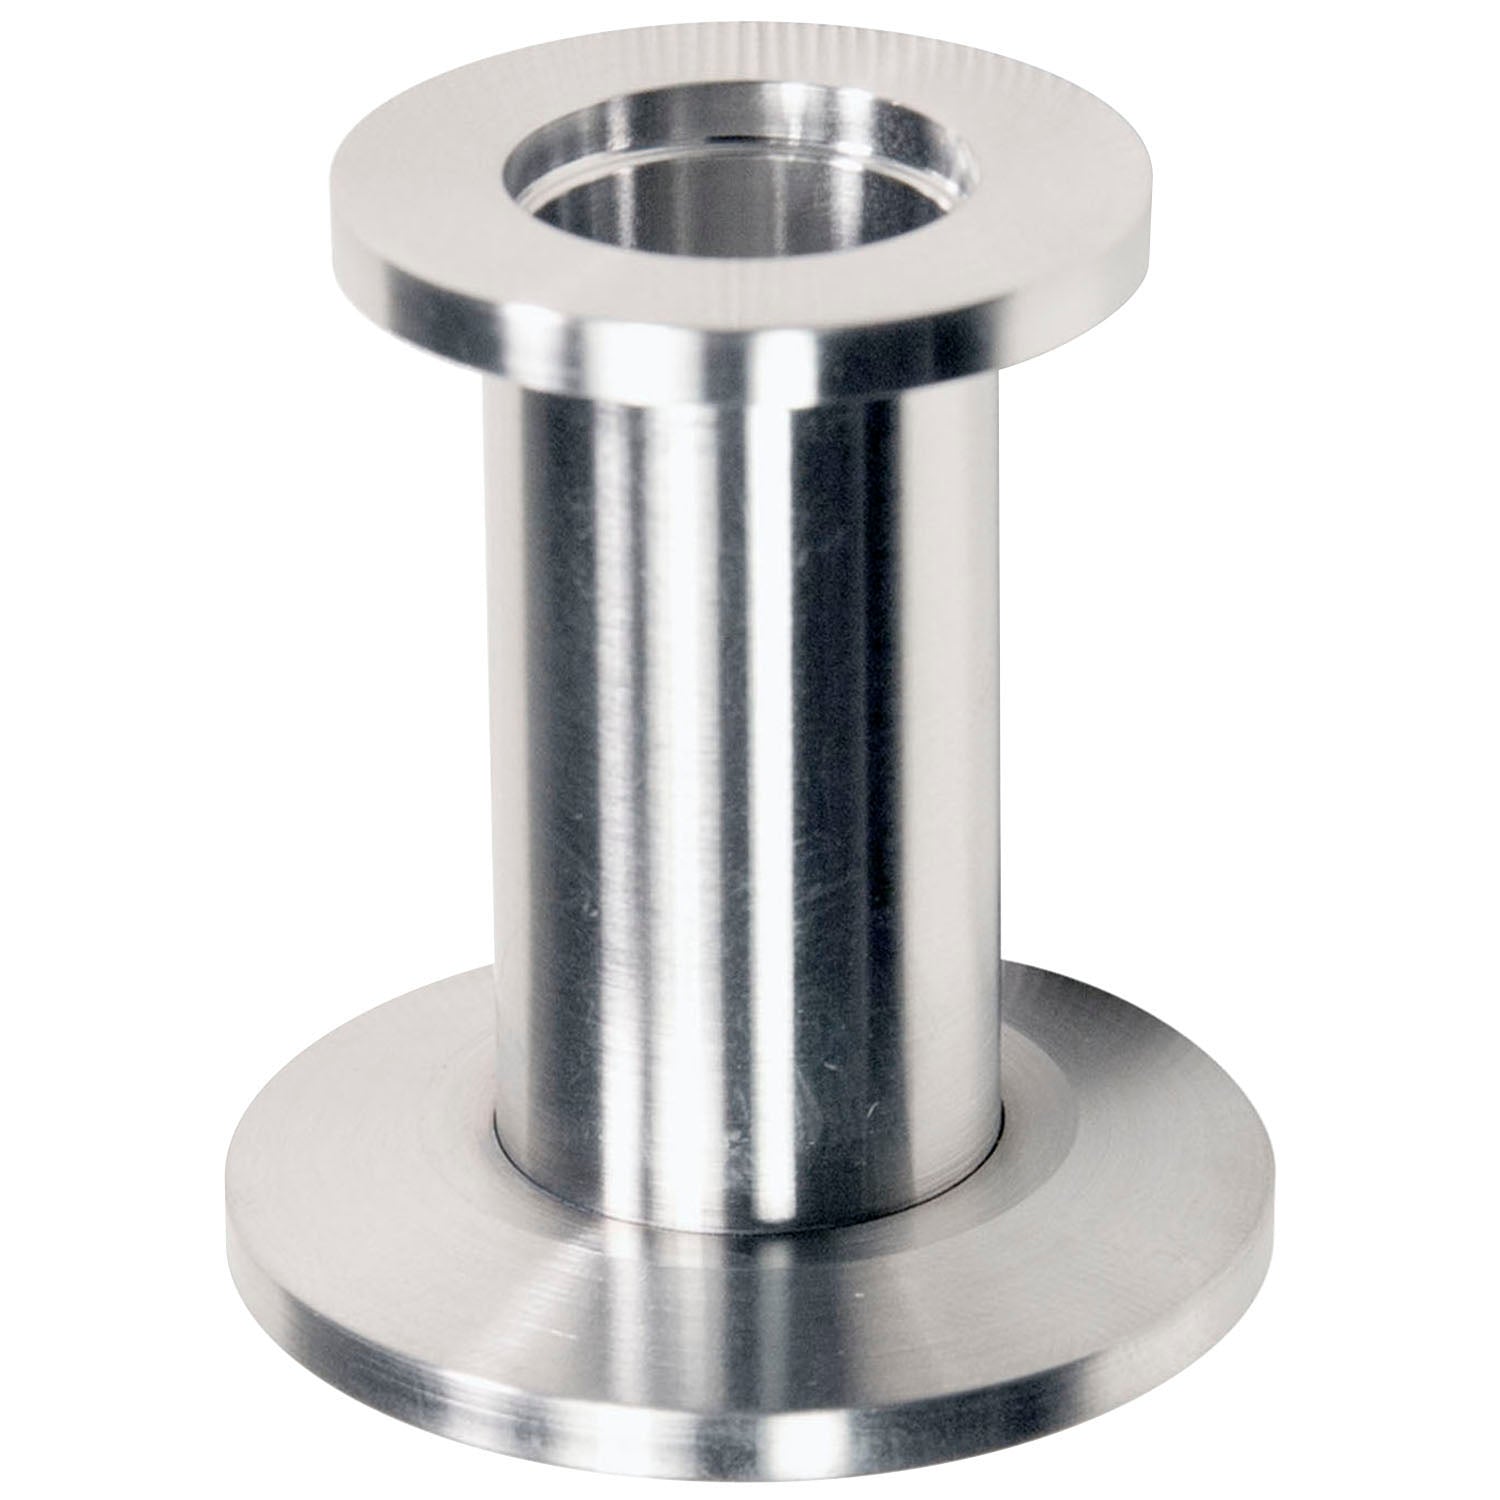 Welch 387121 REDUCER NW 16 TO 25 STAINLESS STEEL